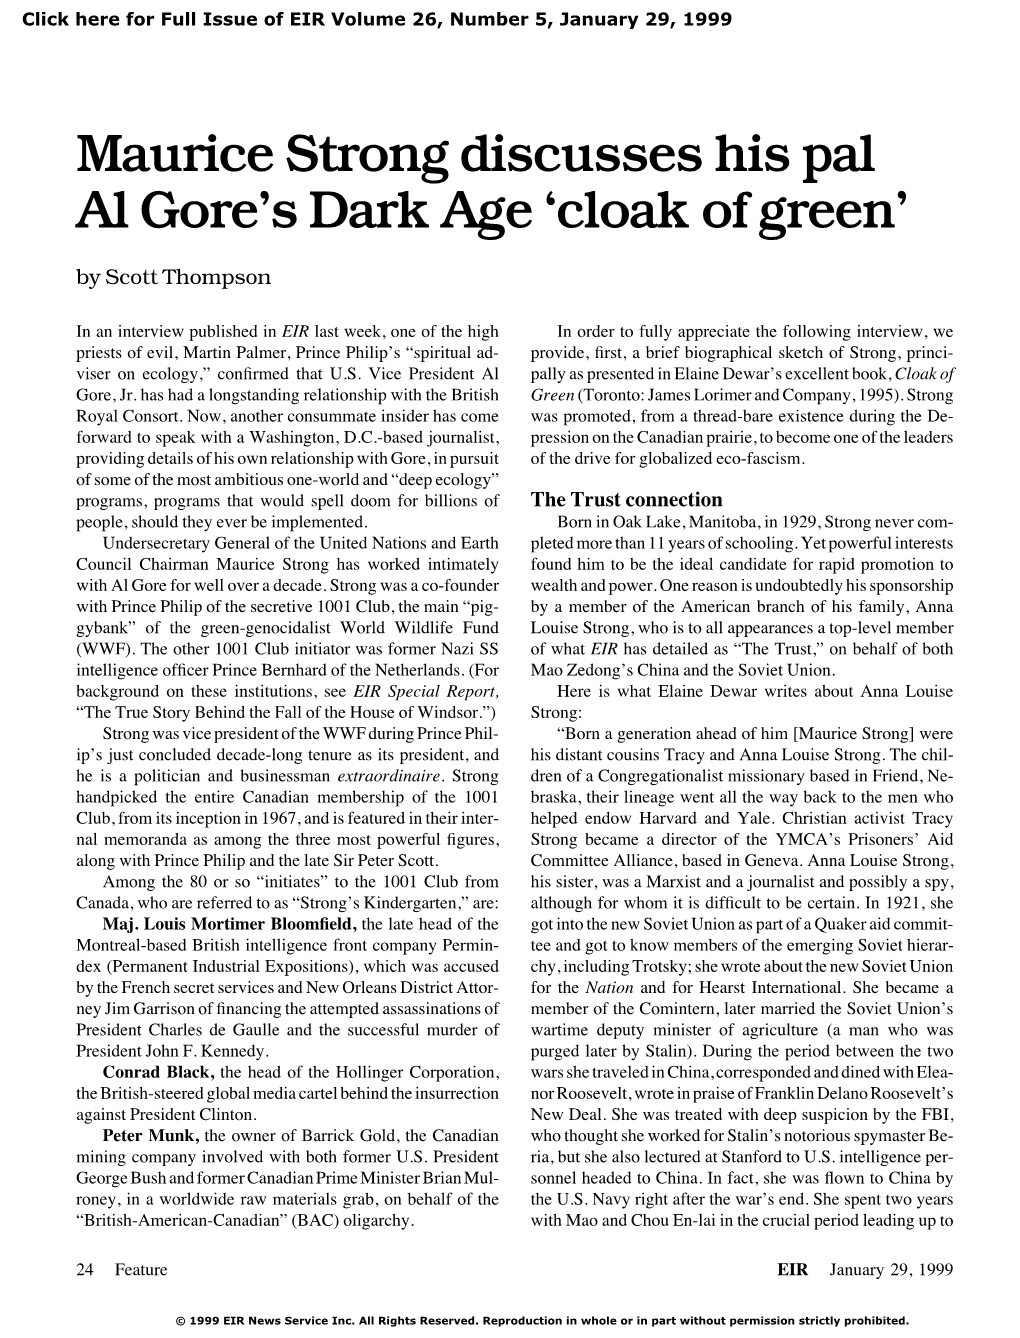 Maurice Strong Discusses His Pal Al Gore's Dark Age 'Cloak of Green'